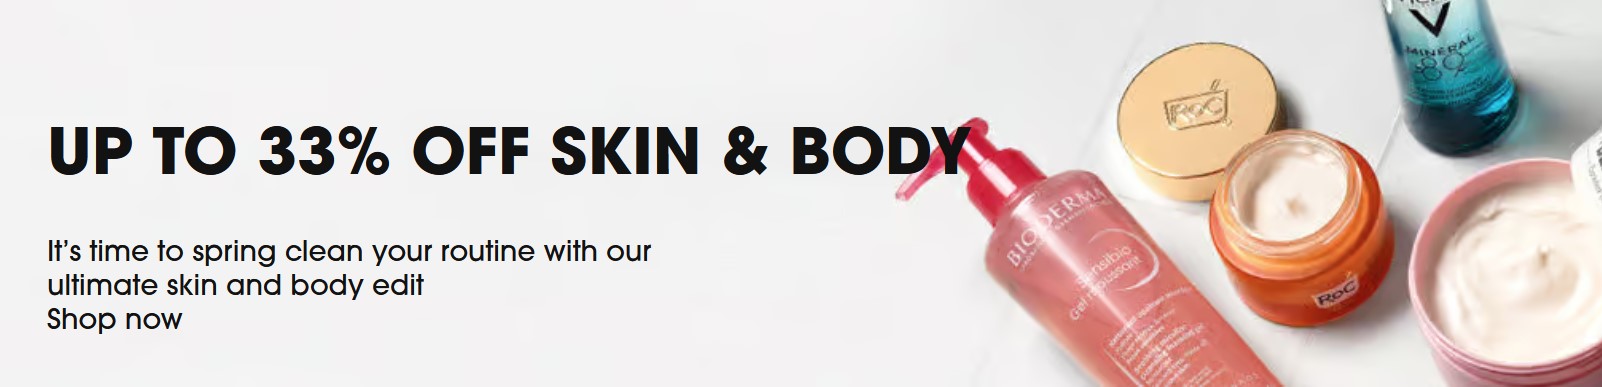 Skin & Body Event at Sephora UK: Up to 33% off